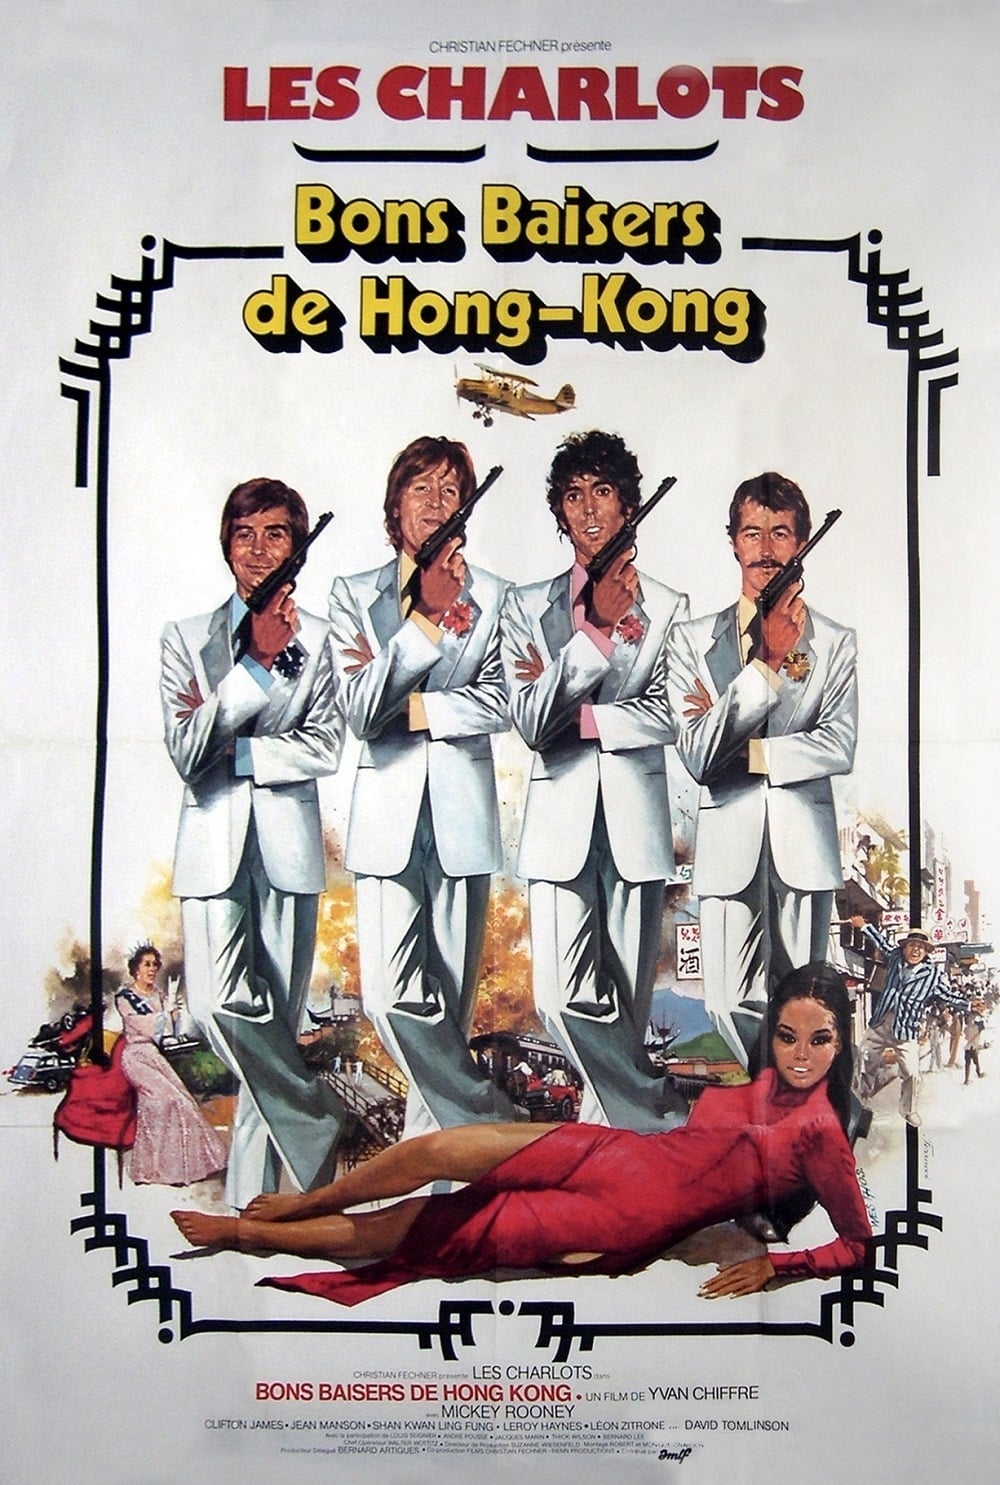 From Hong Kong with Love (1975)